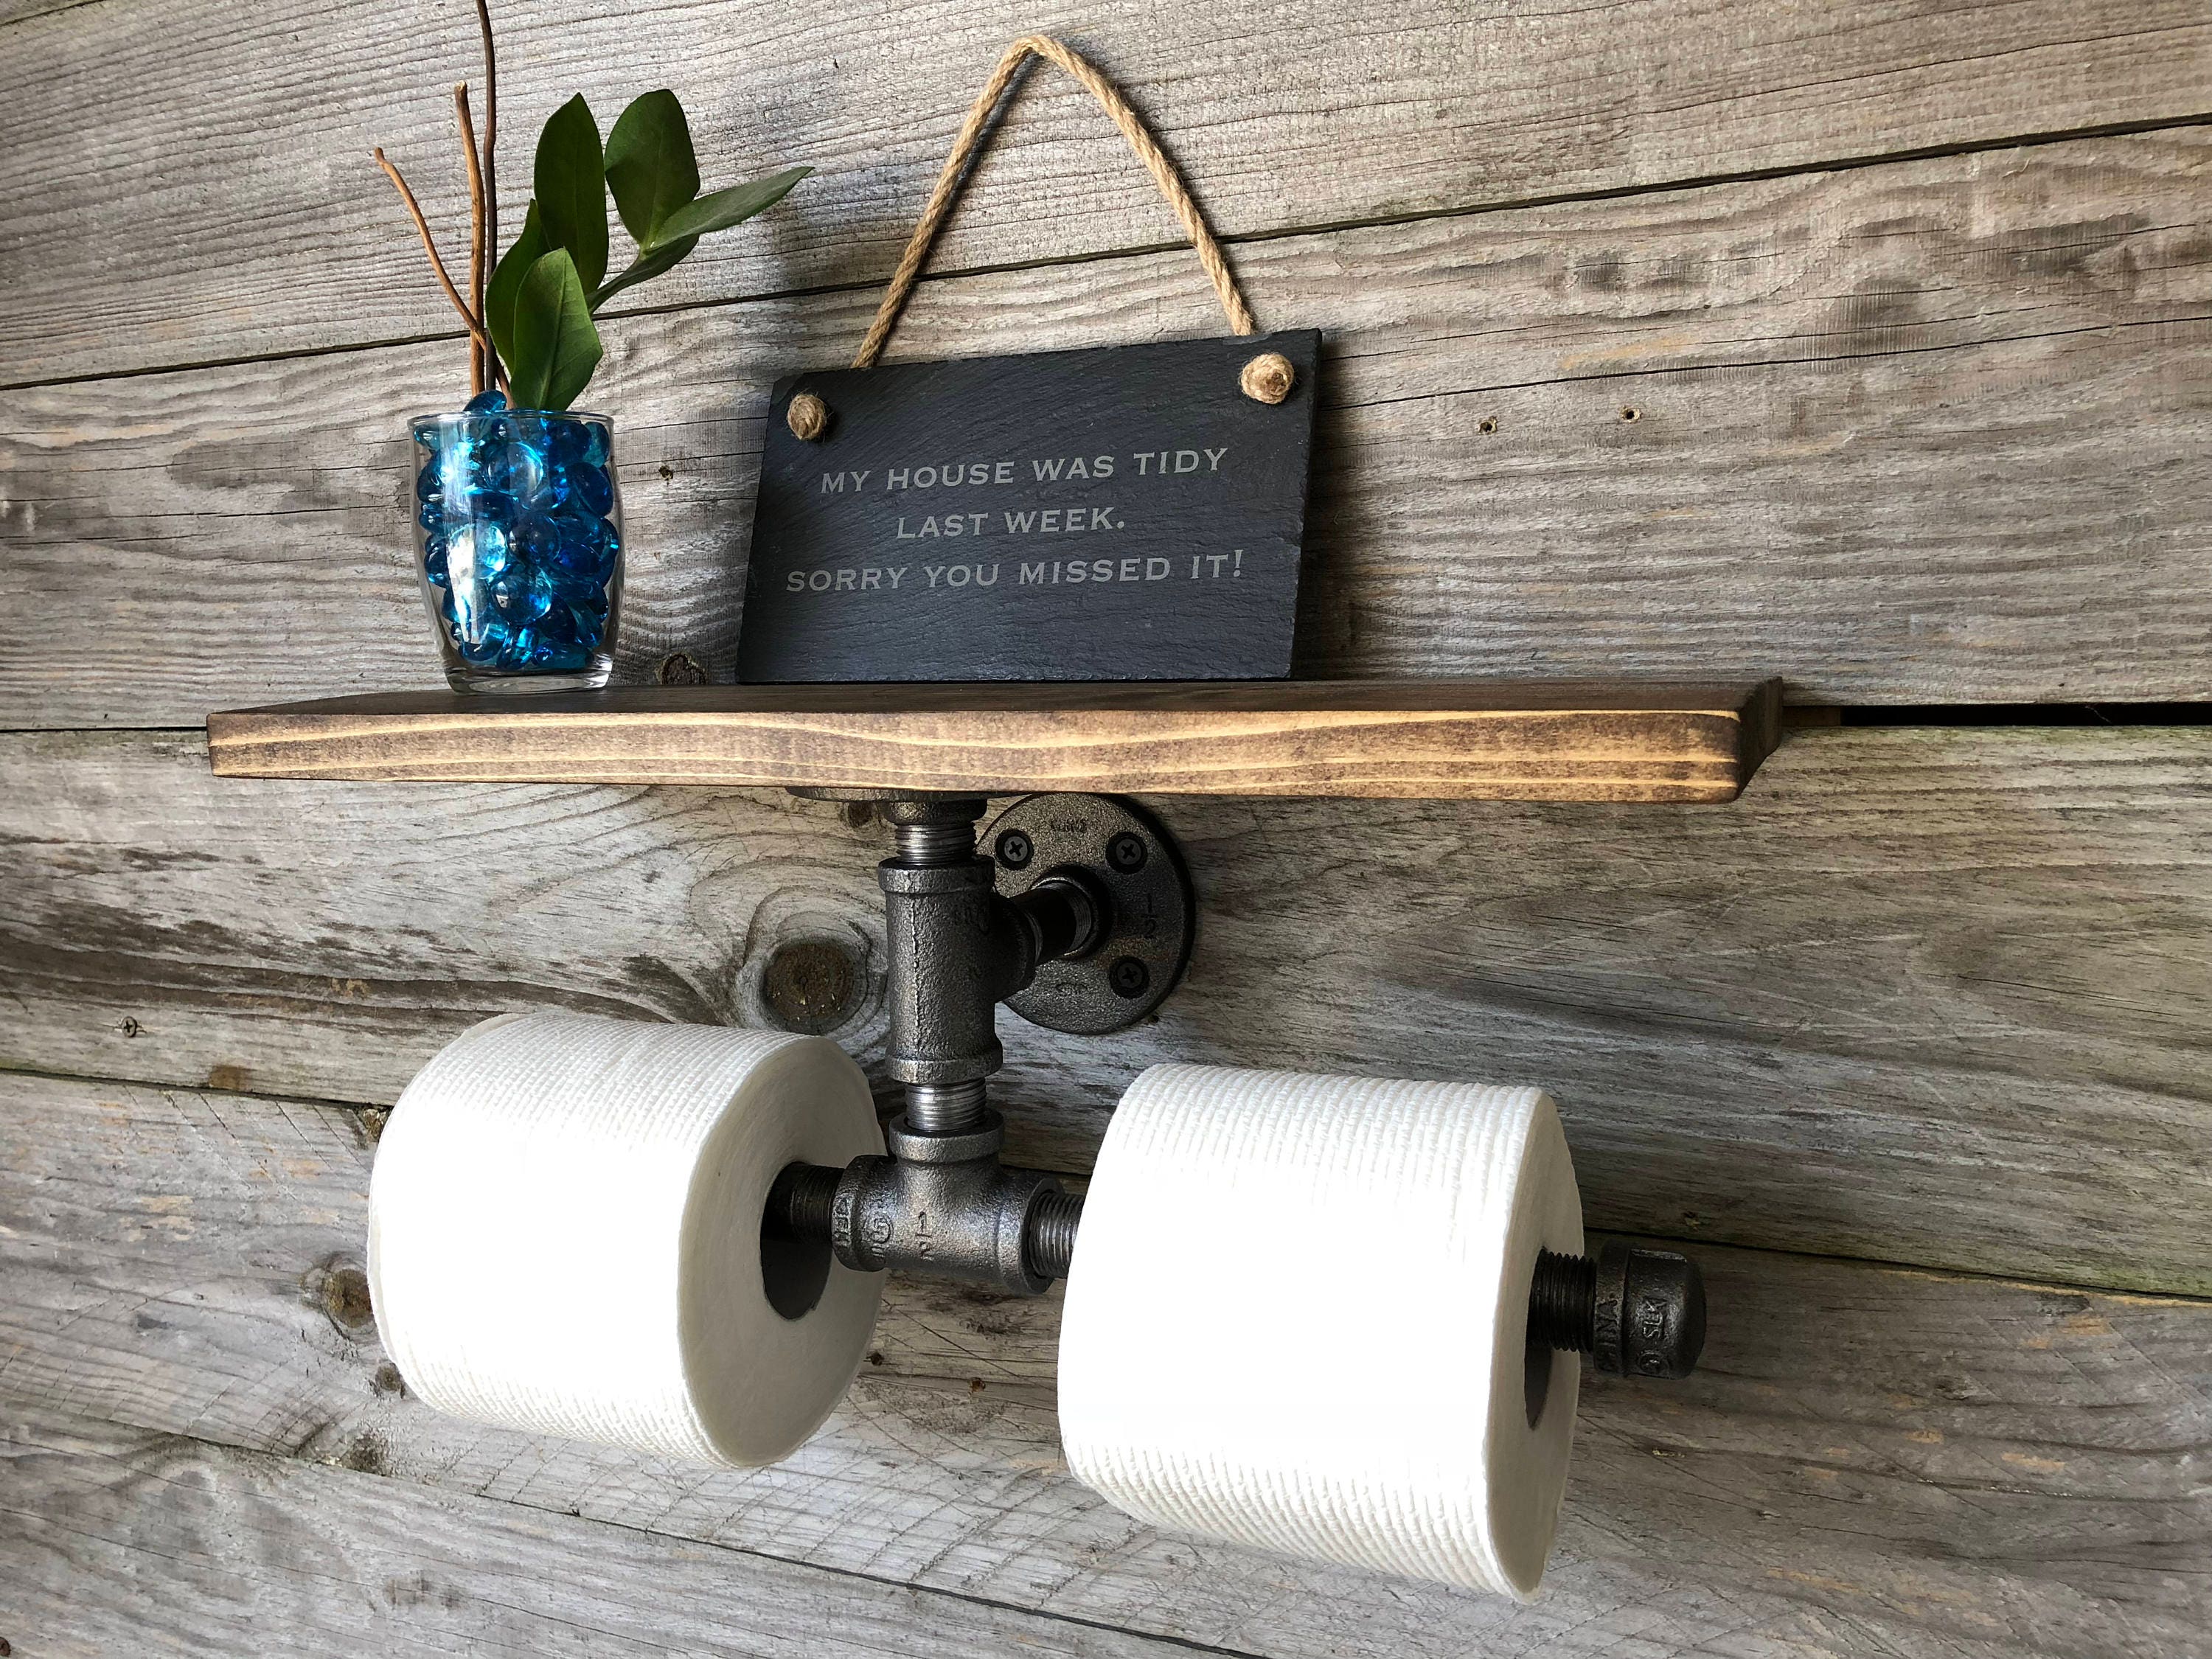 Details about   CAYOREPO Nautical Toilet Paper Holder,Rustic-Industrial  Assorted Colors 